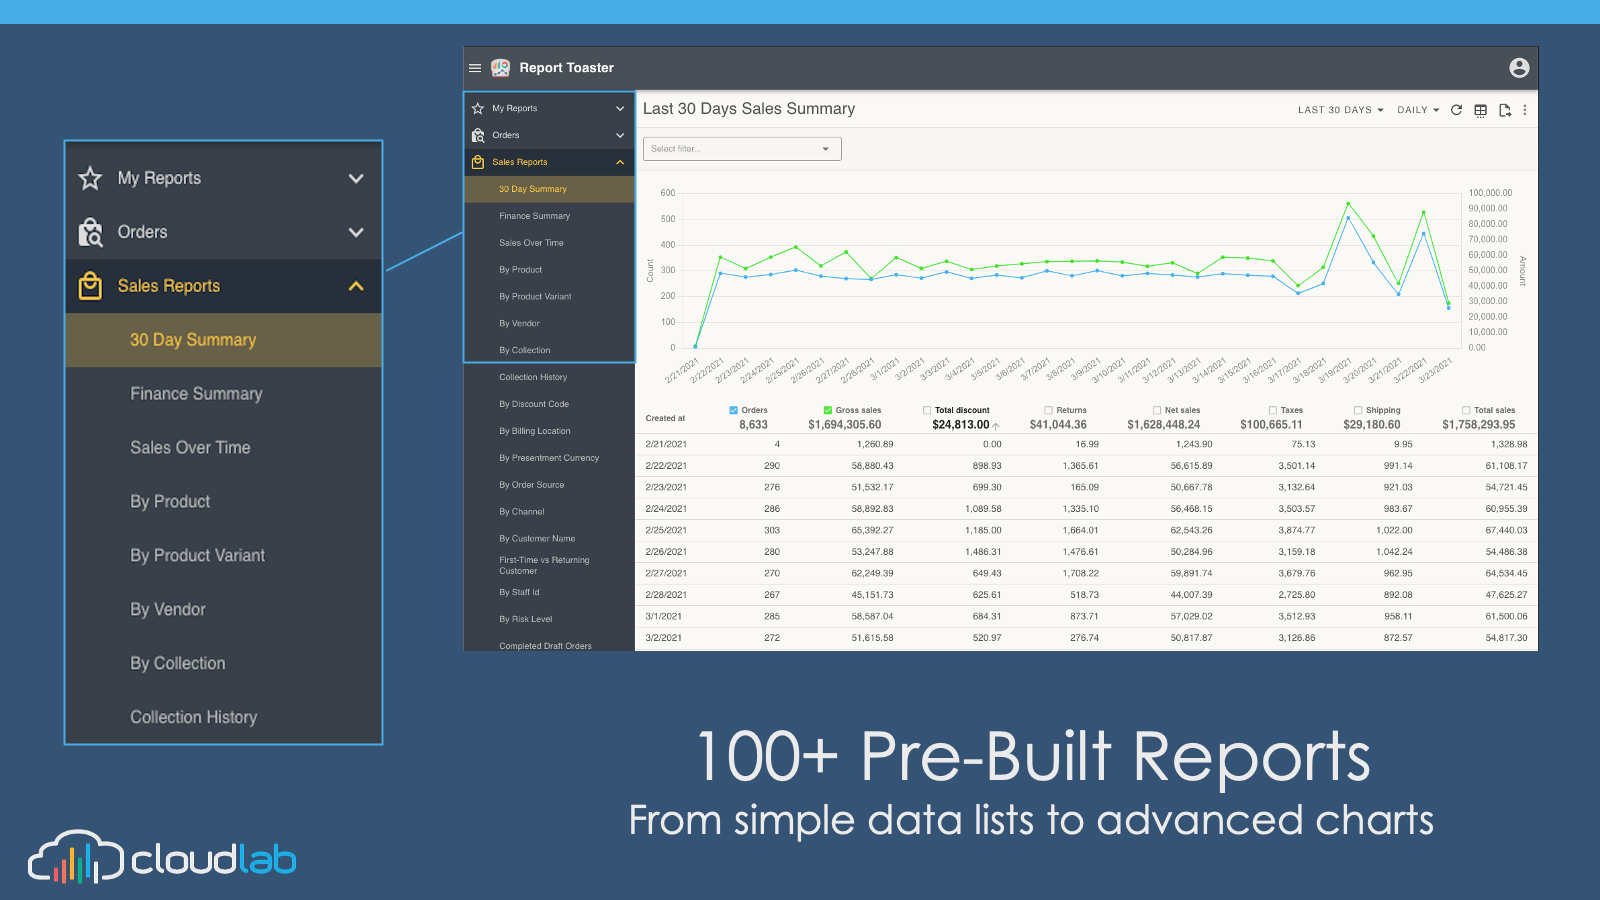 120+ Pre-built reports, from simple lists to advanced charts